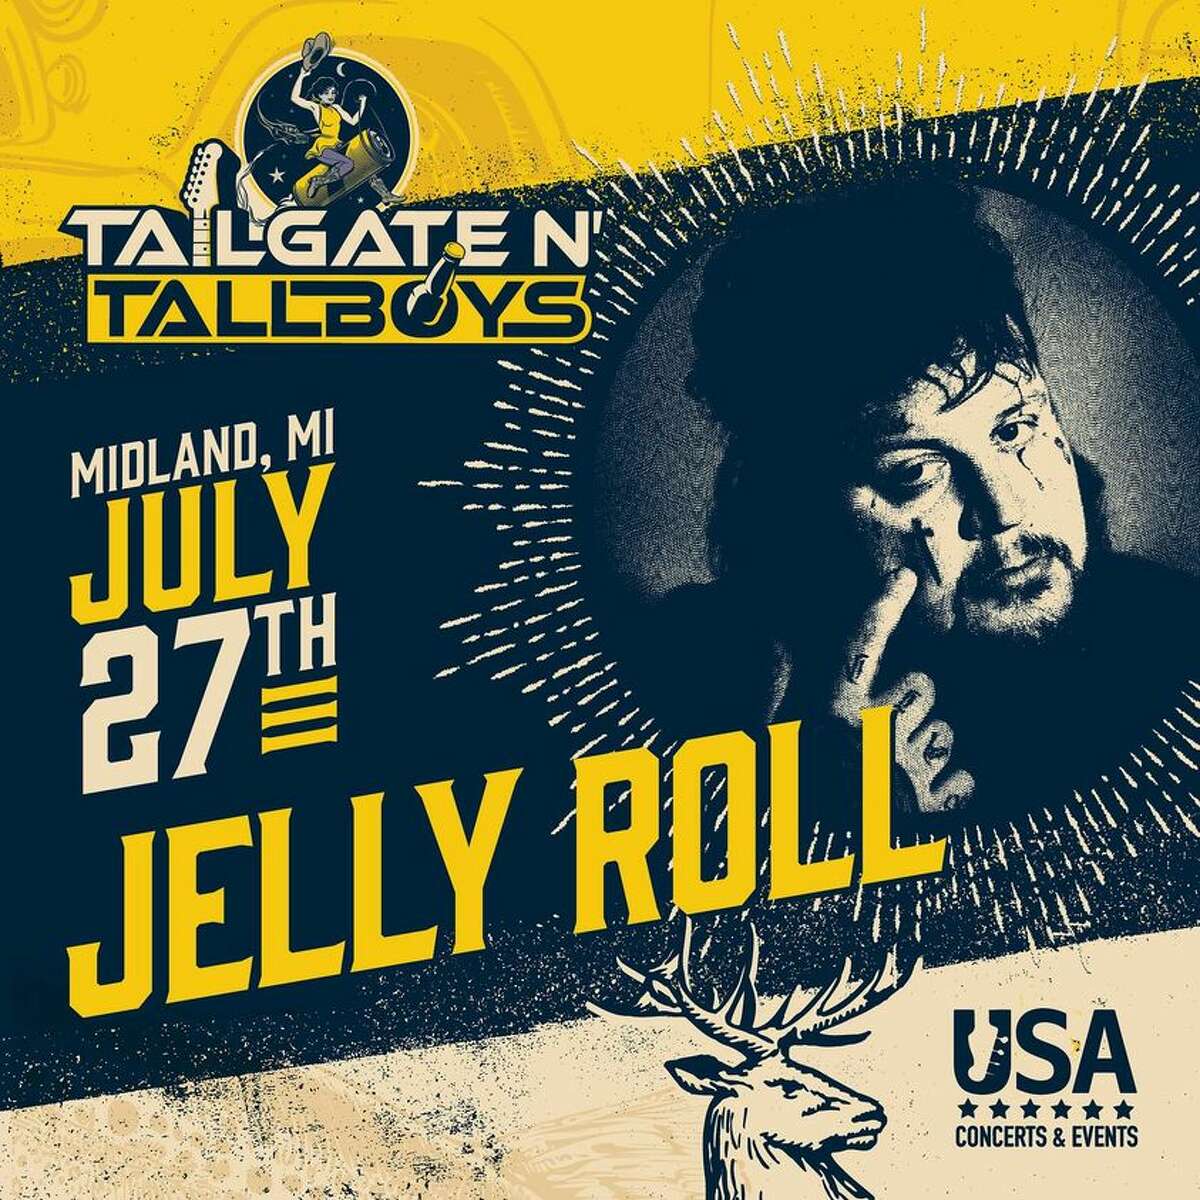 Jelly Roll to perform in Midland next summer at Tailgate N' Tallboys